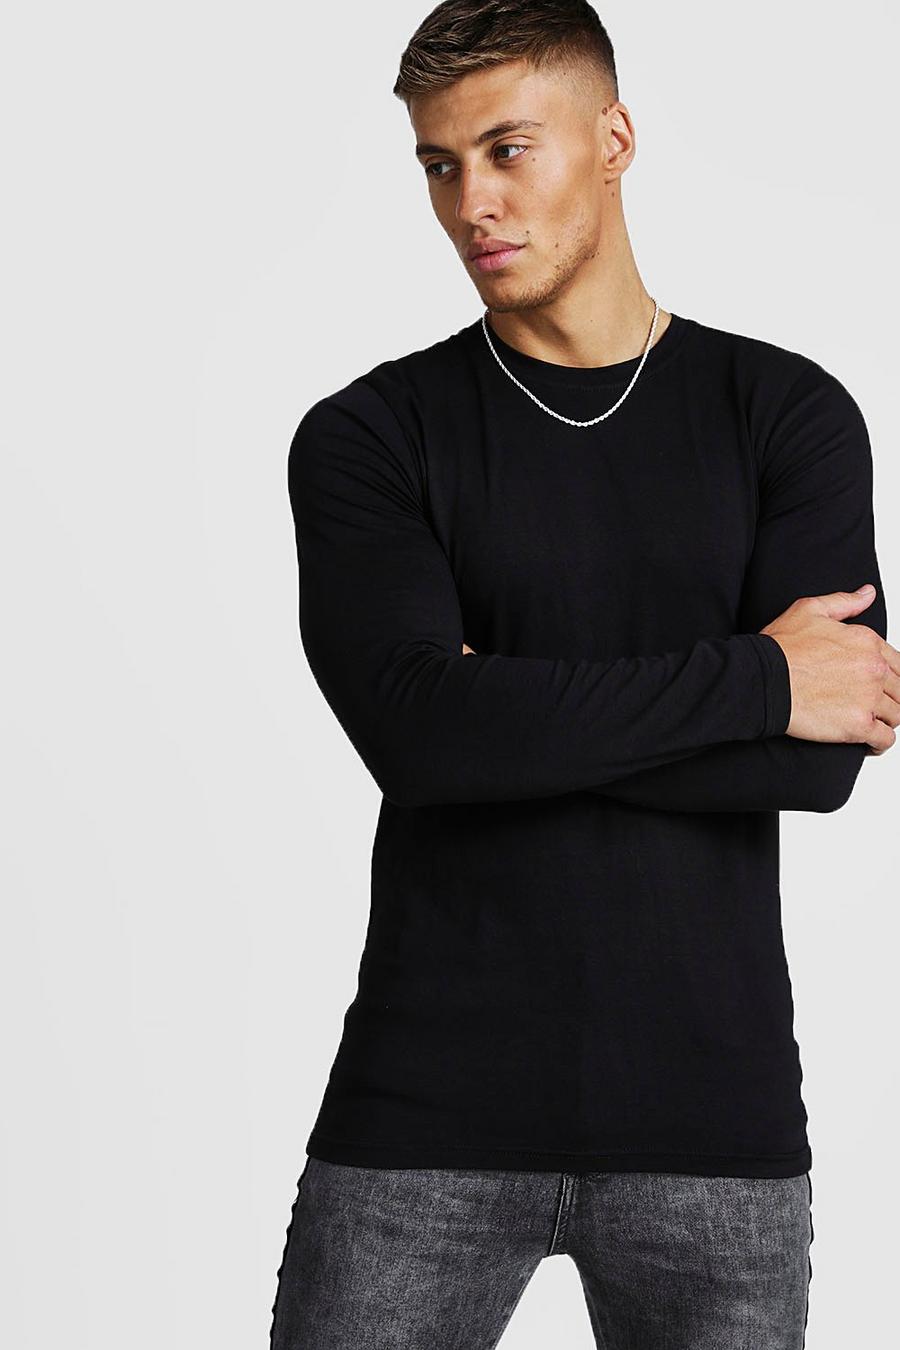 Black Muscle Fit Long Sleeve T-Shirt image number 1